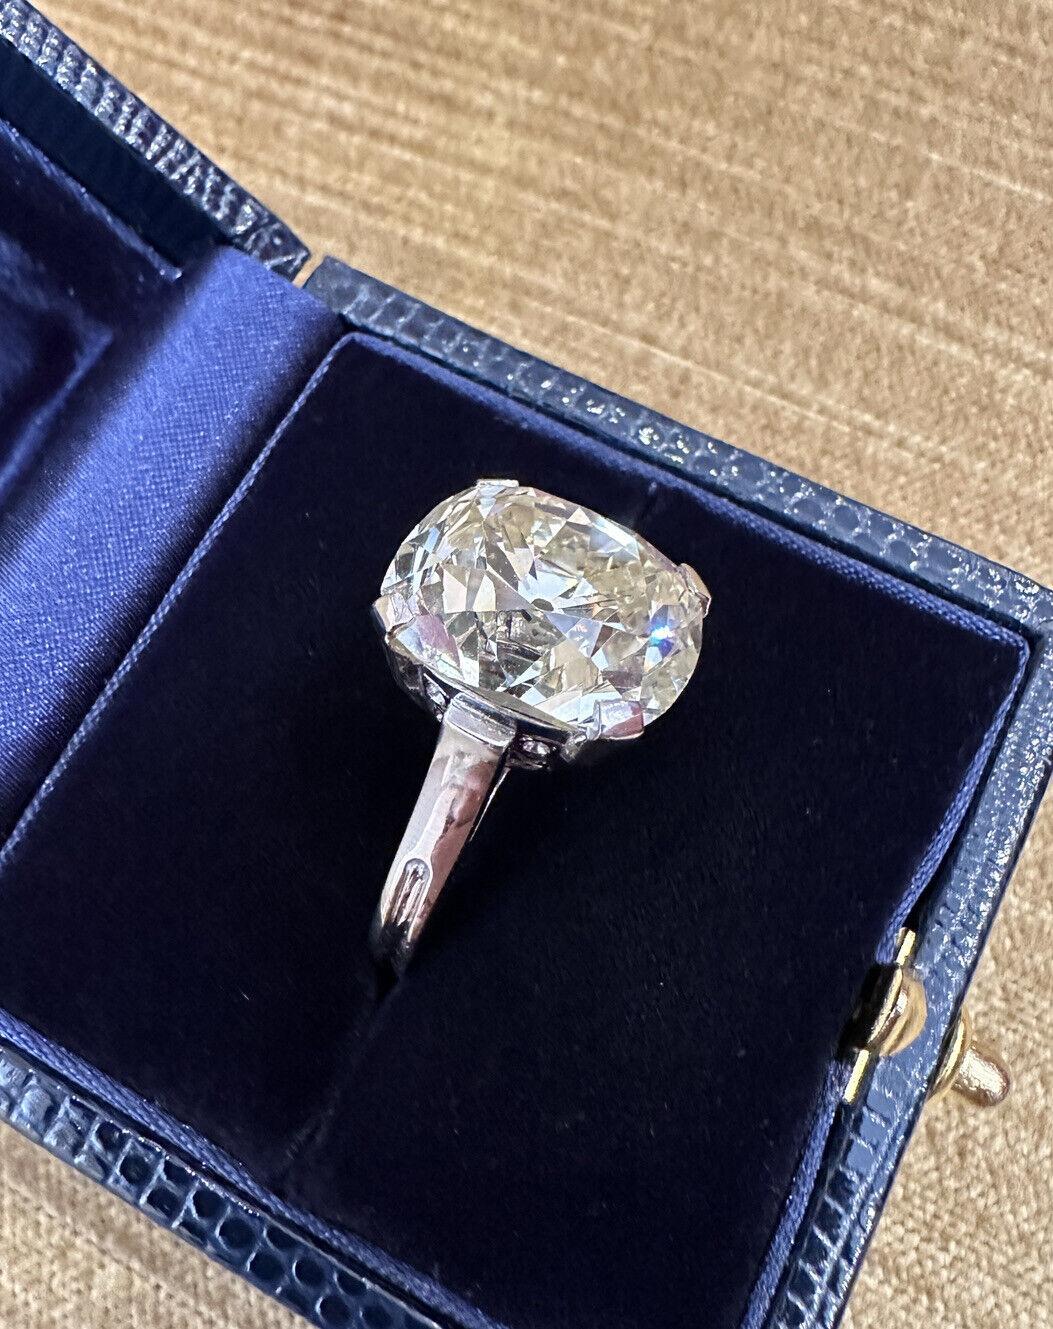 GIA 17.91 Carat Old Cushion Cut Diamond Solitaire Ring in Platinum In Excellent Condition For Sale In La Jolla, CA